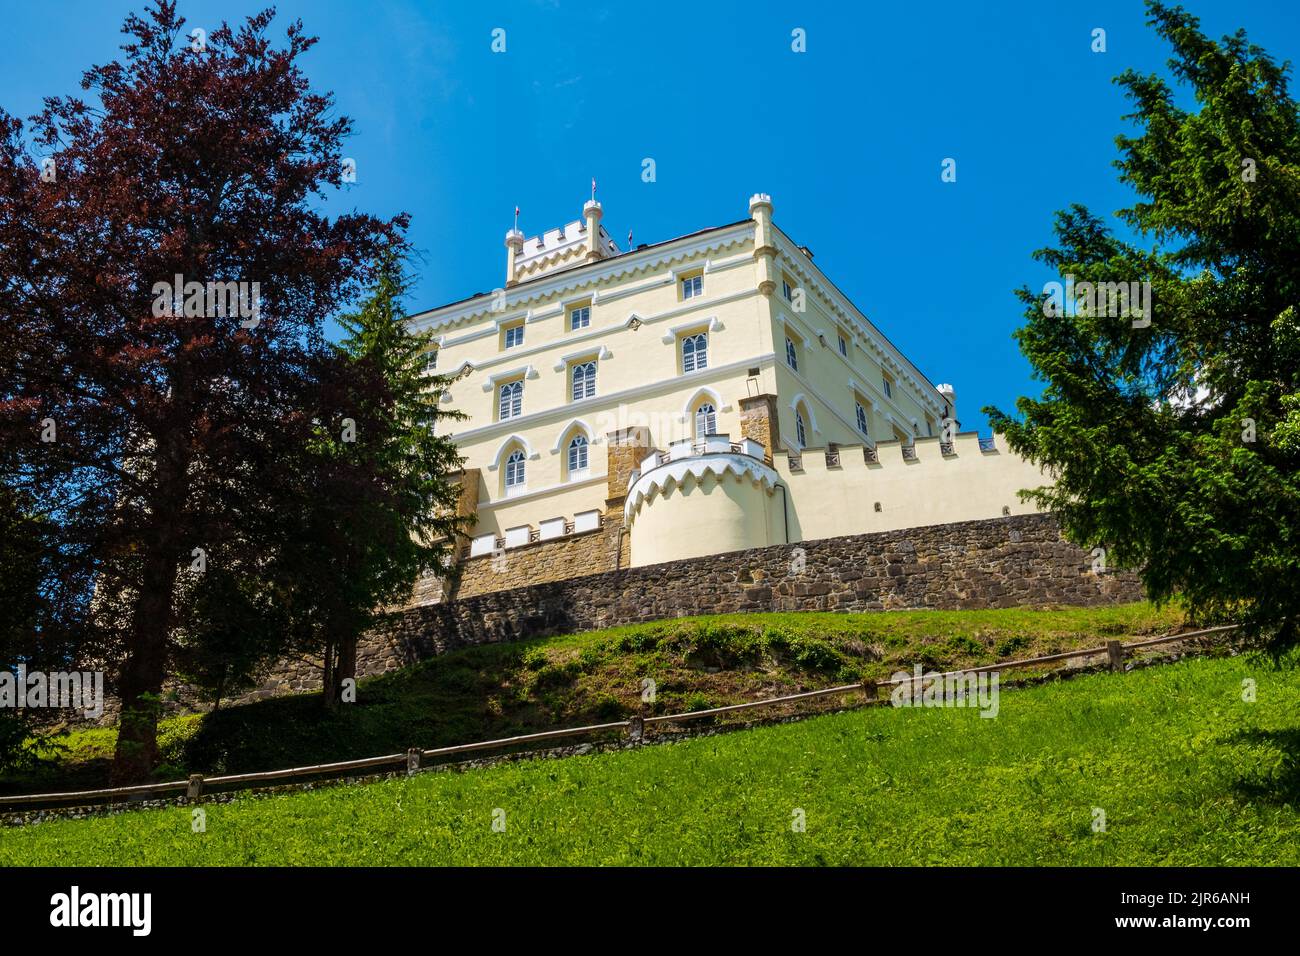 Sweeping view looking up at the pastel colors of Trakošćan Castle in Northern Croatia Stock Photo